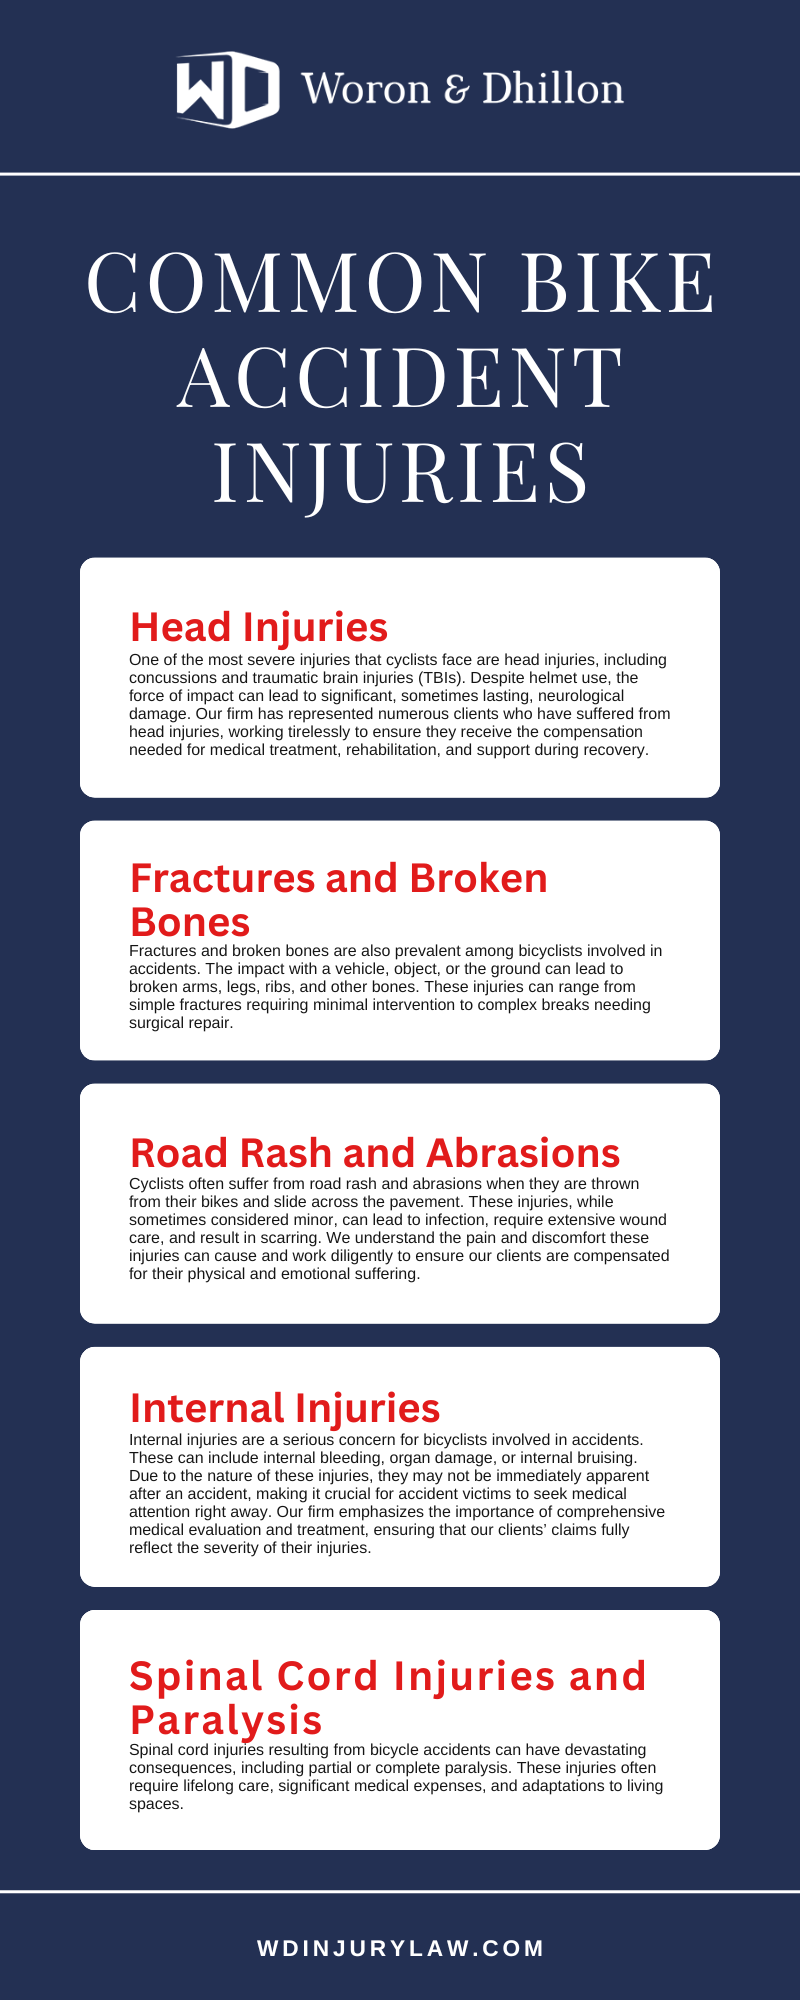 Common Bike Accident Injuries Infographic